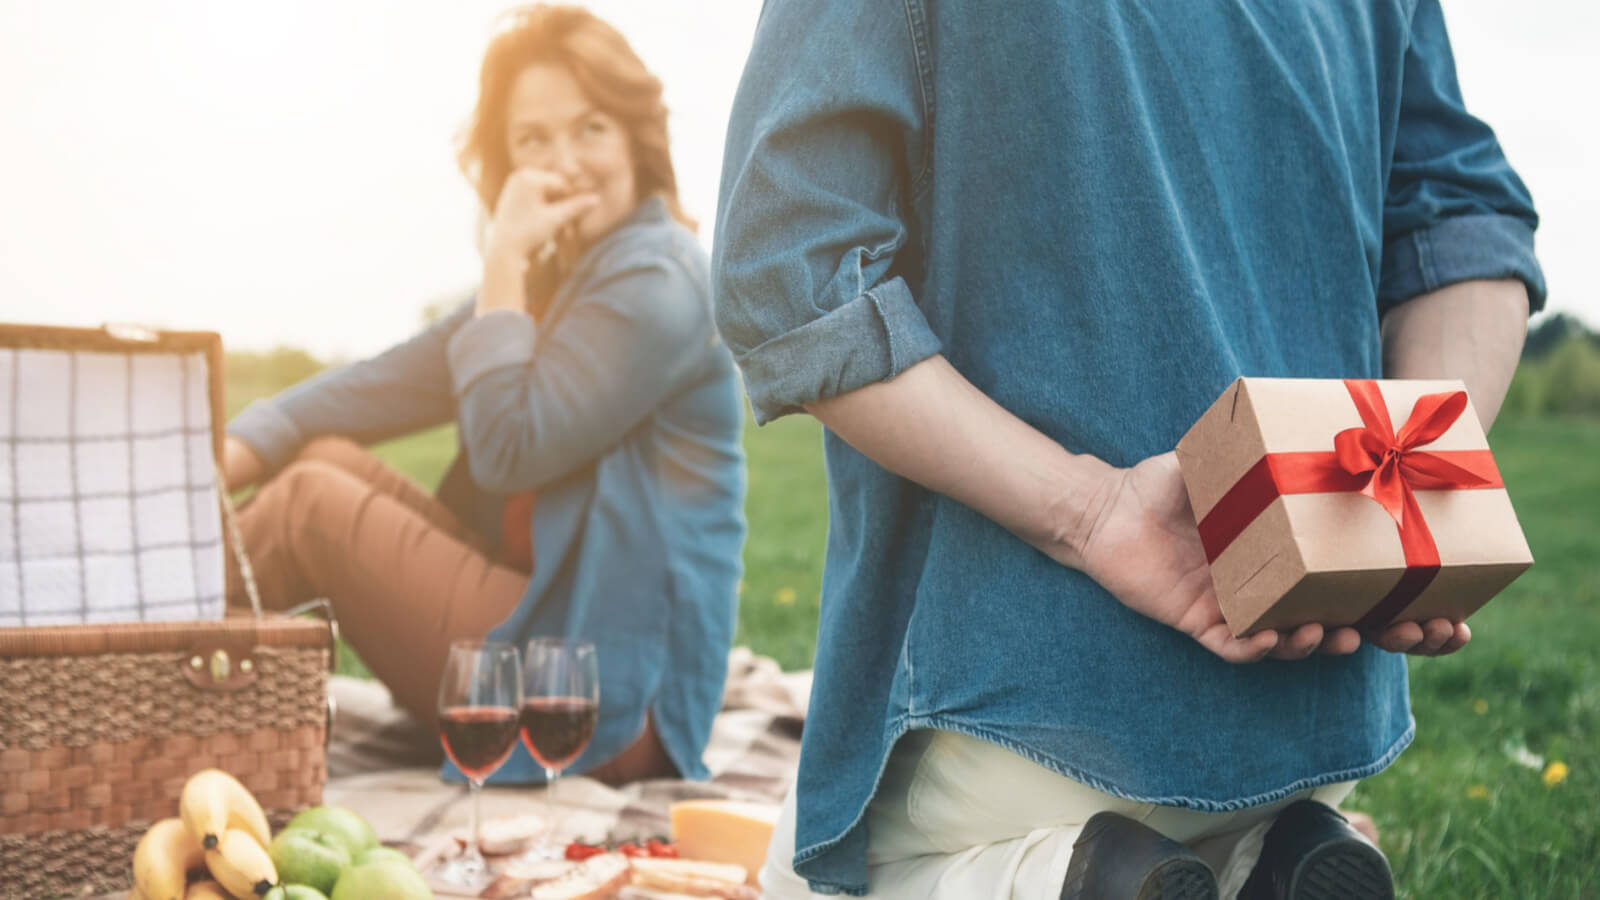 couple on picnic, man holding gift behind back